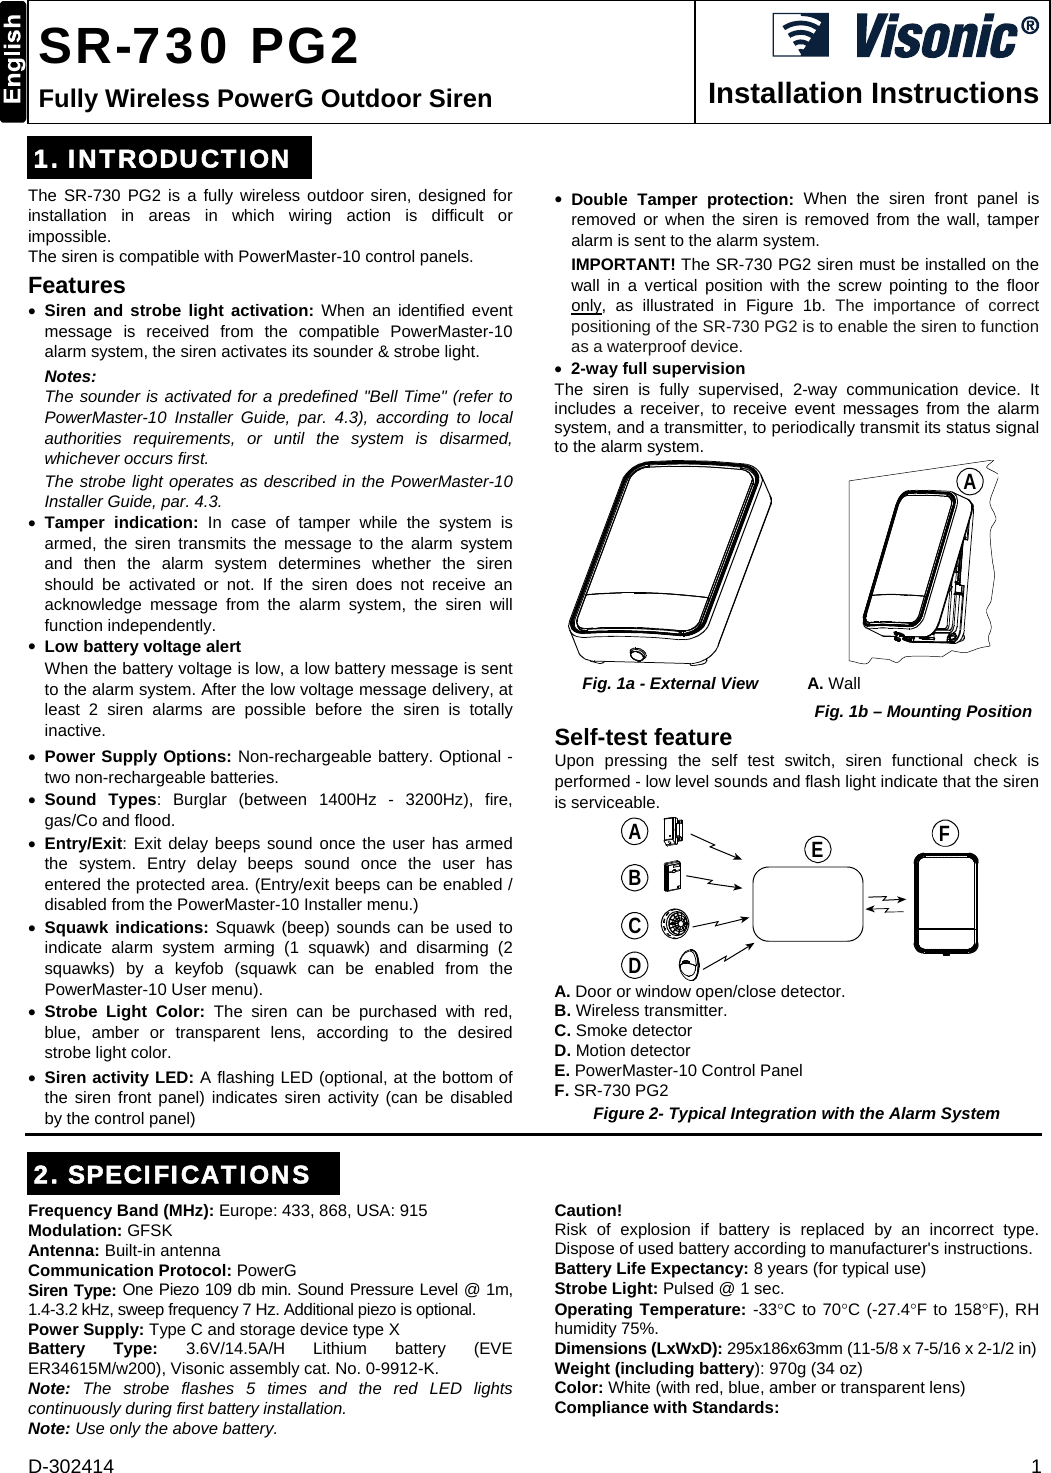 D-302414  1  SR-730 PG2 Fully Wireless PowerG Outdoor Siren  Installation Instructions 1. INTRODUCTION The SR-730 PG2 is a fully wireless outdoor siren, designed for installation in areas in which wiring action is difficult or impossible. The siren is compatible with PowerMaster-10 control panels.  Features  Siren and strobe light activation: When an identified event message is received from the compatible PowerMaster-10 alarm system, the siren activates its sounder &amp; strobe light.  Notes:   The sounder is activated for a predefined &quot;Bell Time&quot; (refer to PowerMaster-10 Installer Guide, par. 4.3), according to local authorities requirements, or until the system is disarmed, whichever occurs first.  The strobe light operates as described in the PowerMaster-10 Installer Guide, par. 4.3.   Tamper indication: In case of tamper while the system is armed, the siren transmits the message to the alarm system and then the alarm system determines whether the siren should be activated or not. If the siren does not receive an acknowledge message from the alarm system, the siren will function independently.   Low battery voltage alert When the battery voltage is low, a low battery message is sent to the alarm system. After the low voltage message delivery, at least 2 siren alarms are possible before the siren is totally inactive.  Power Supply Options: Non-rechargeable battery. Optional - two non-rechargeable batteries.   Sound Types: Burglar (between 1400Hz - 3200Hz), fire, gas/Co and flood.  Entry/Exit: Exit delay beeps sound once the user has armed the system. Entry delay beeps sound once the user has entered the protected area. (Entry/exit beeps can be enabled / disabled from the PowerMaster-10 Installer menu.)  Squawk indications: Squawk (beep) sounds can be used to indicate alarm system arming (1 squawk) and disarming (2 squawks) by a keyfob (squawk can be enabled from the PowerMaster-10 User menu).  Strobe Light Color: The siren can be purchased with red, blue, amber or transparent lens, according to the desired strobe light color.   Siren activity LED: A flashing LED (optional, at the bottom of the siren front panel) indicates siren activity (can be disabled by the control panel)  Double Tamper protection: When the siren front panel is removed or when the siren is removed from the wall, tamper alarm is sent to the alarm system. IMPORTANT! The SR-730 PG2 siren must be installed on the wall in a vertical position with the screw pointing to the floor only, as illustrated in Figure 1b. The importance of correct positioning of the SR-730 PG2 is to enable the siren to function as a waterproof device.  2-way full supervision The siren is fully supervised, 2-way communication device. It includes a receiver, to receive event messages from the alarm system, and a transmitter, to periodically transmit its status signal to the alarm system.  A Fig. 1a - External View A. Wall Fig. 1b – Mounting Position Self-test feature Upon pressing the self test switch, siren functional check is performed - low level sounds and flash light indicate that the siren is serviceable. ABCDEF A. Door or window open/close detector. B. Wireless transmitter. C. Smoke detector D. Motion detector E. PowerMaster-10 Control Panel F. SR-730 PG2  Figure 2- Typical Integration with the Alarm System 2. SPECIFICATIONS Frequency Band (MHz): Europe: 433, 868, USA: 915 Modulation: GFSK Antenna: Built-in antenna Communication Protocol: PowerG Siren Type: One Piezo 109 db min. Sound Pressure Level @ 1m, 1.4-3.2 kHz, sweep frequency 7 Hz. Additional piezo is optional. Power Supply: Type C and storage device type X Battery Type: 3.6V/14.5A/H Lithium battery (EVE ER34615M/w200), Visonic assembly cat. No. 0-9912-K. Note: The strobe flashes 5 times and the red LED lights continuously during first battery installation.  Note: Use only the above battery. Caution! Risk of explosion if battery is replaced by an incorrect type. Dispose of used battery according to manufacturer&apos;s instructions. Battery Life Expectancy: 8 years (for typical use) Strobe Light: Pulsed @ 1 sec. Operating Temperature: -33C to 70C (-27.4F to 158F), RH humidity 75%. Dimensions (LxWxD): 295x186x63mm (11-5/8 x 7-5/16 x 2-1/2 in) Weight (including battery): 970g (34 oz) Color: White (with red, blue, amber or transparent lens) Compliance with Standards:  